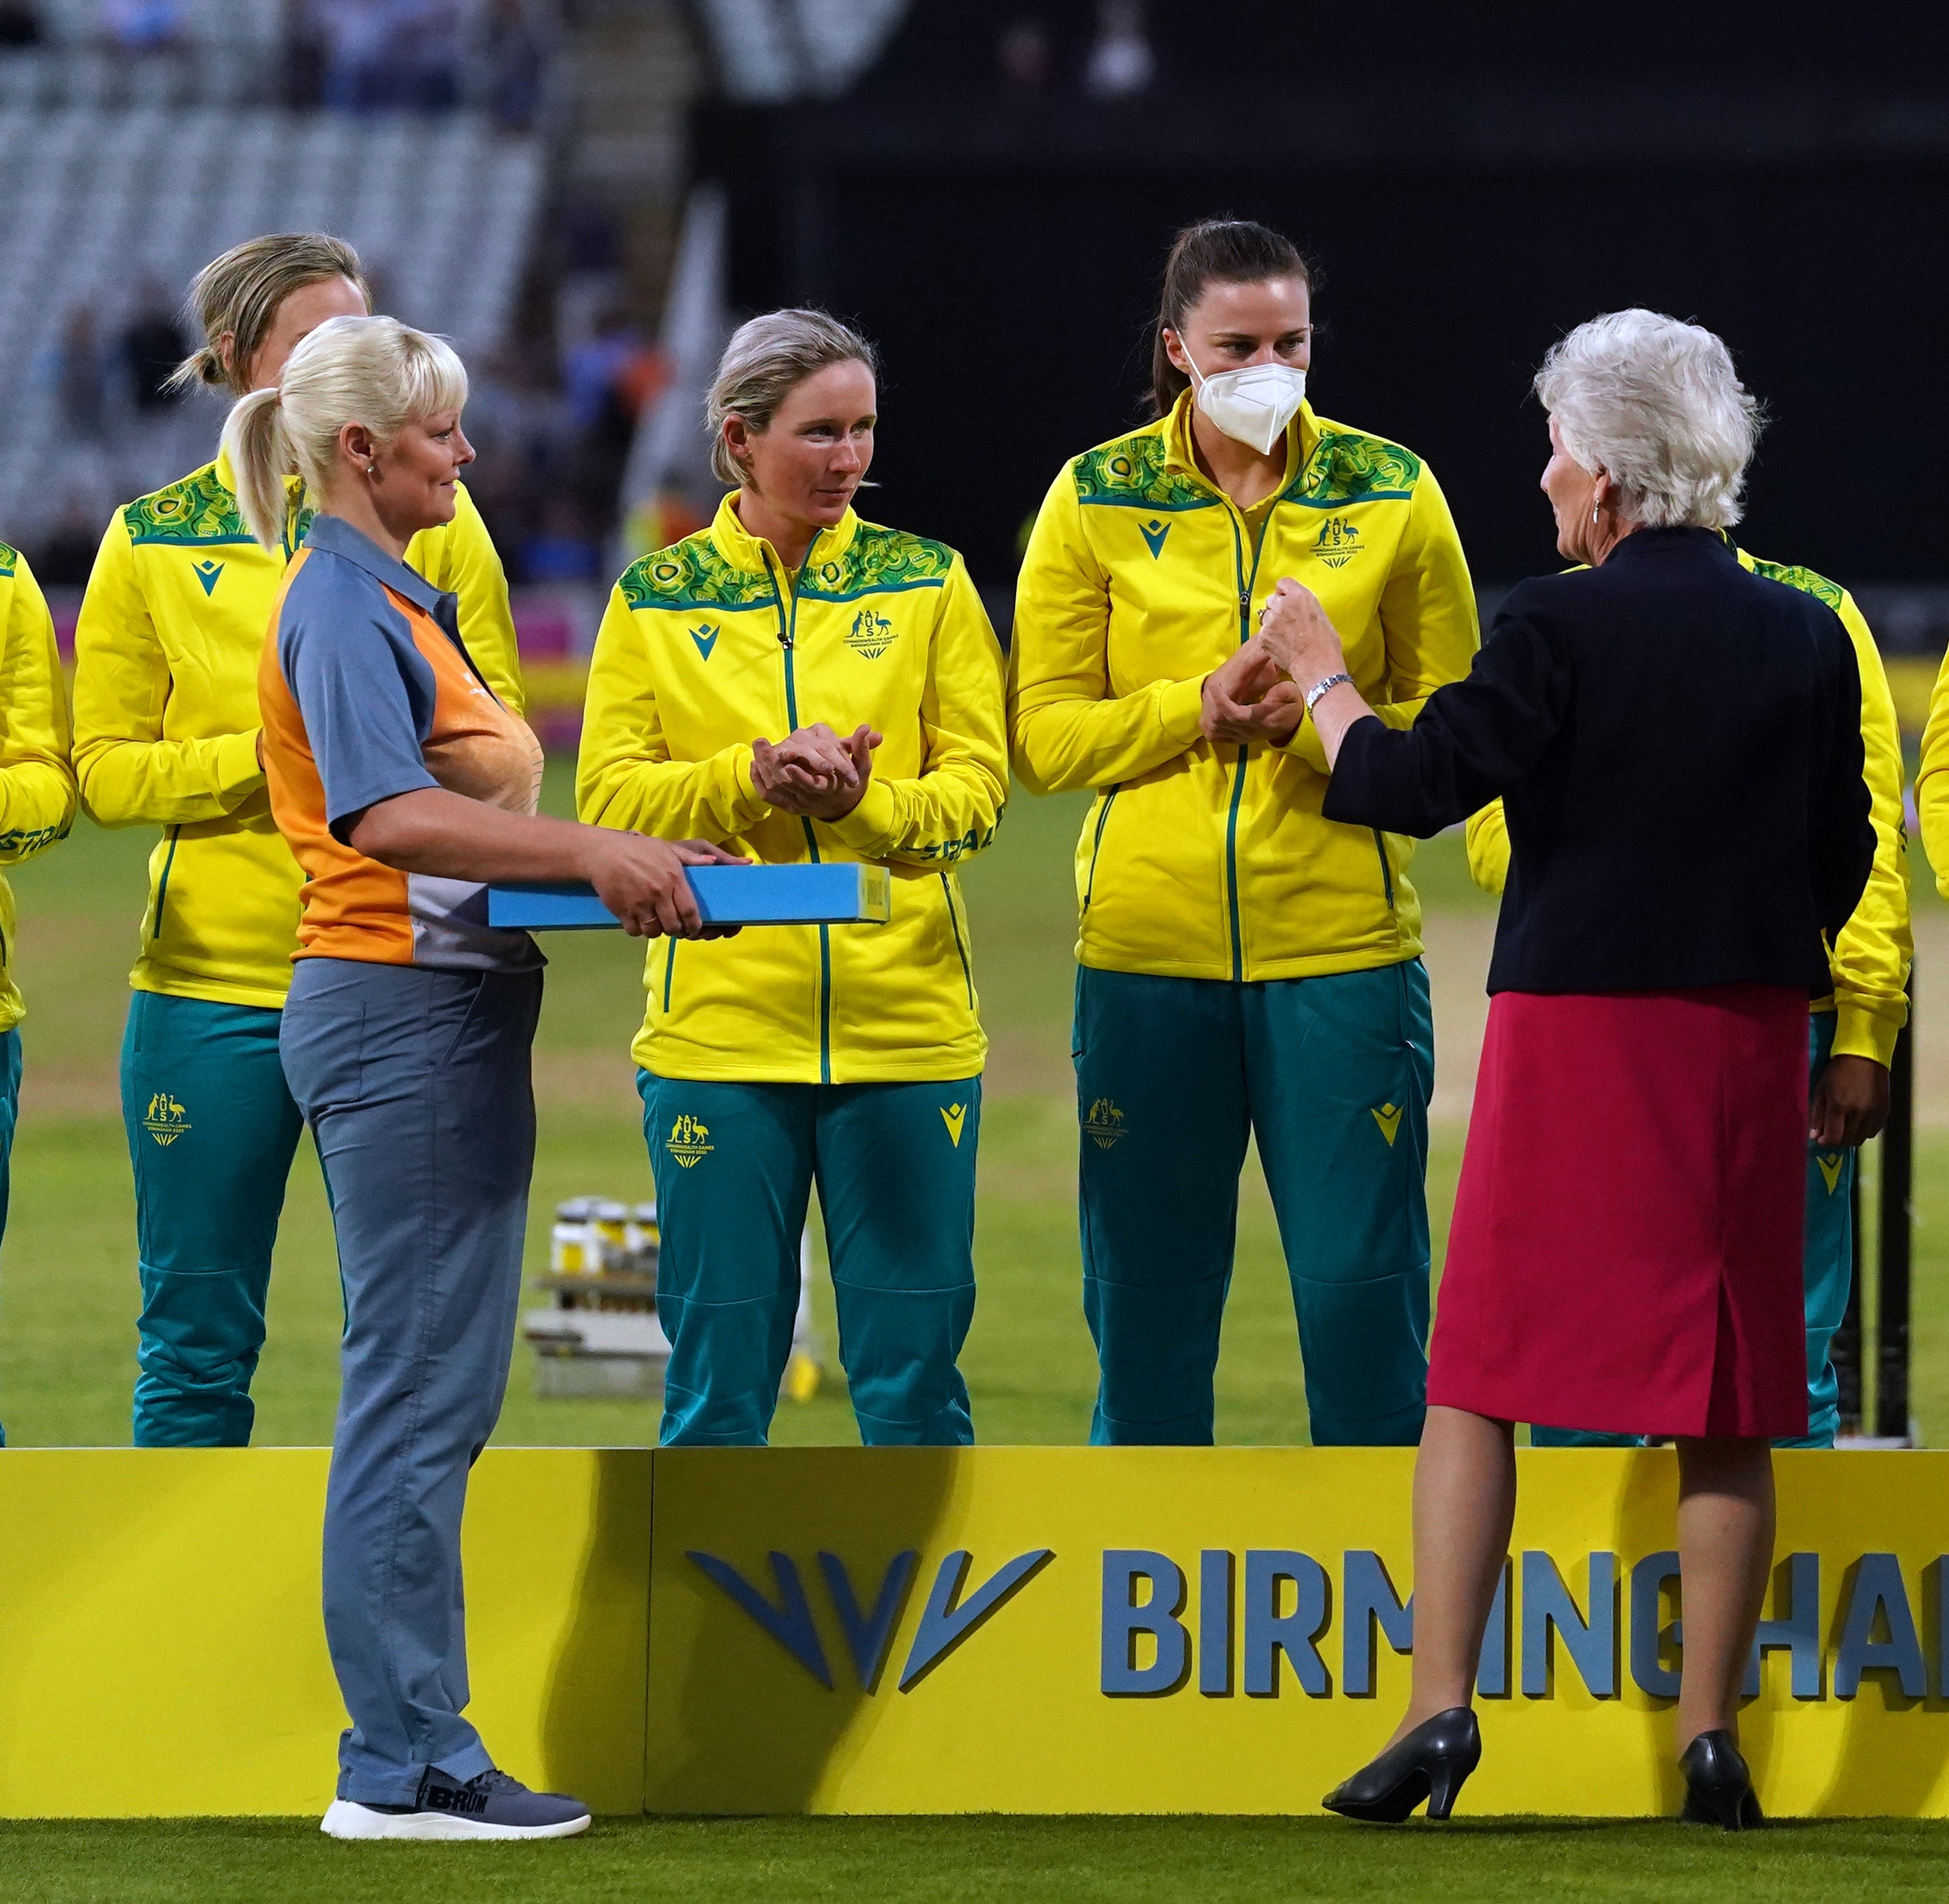 Australia’s Tahlia McGrath receives her medal whilst wearing a mask due to receiving a positive covid-19 test (Adam Davy/PA)